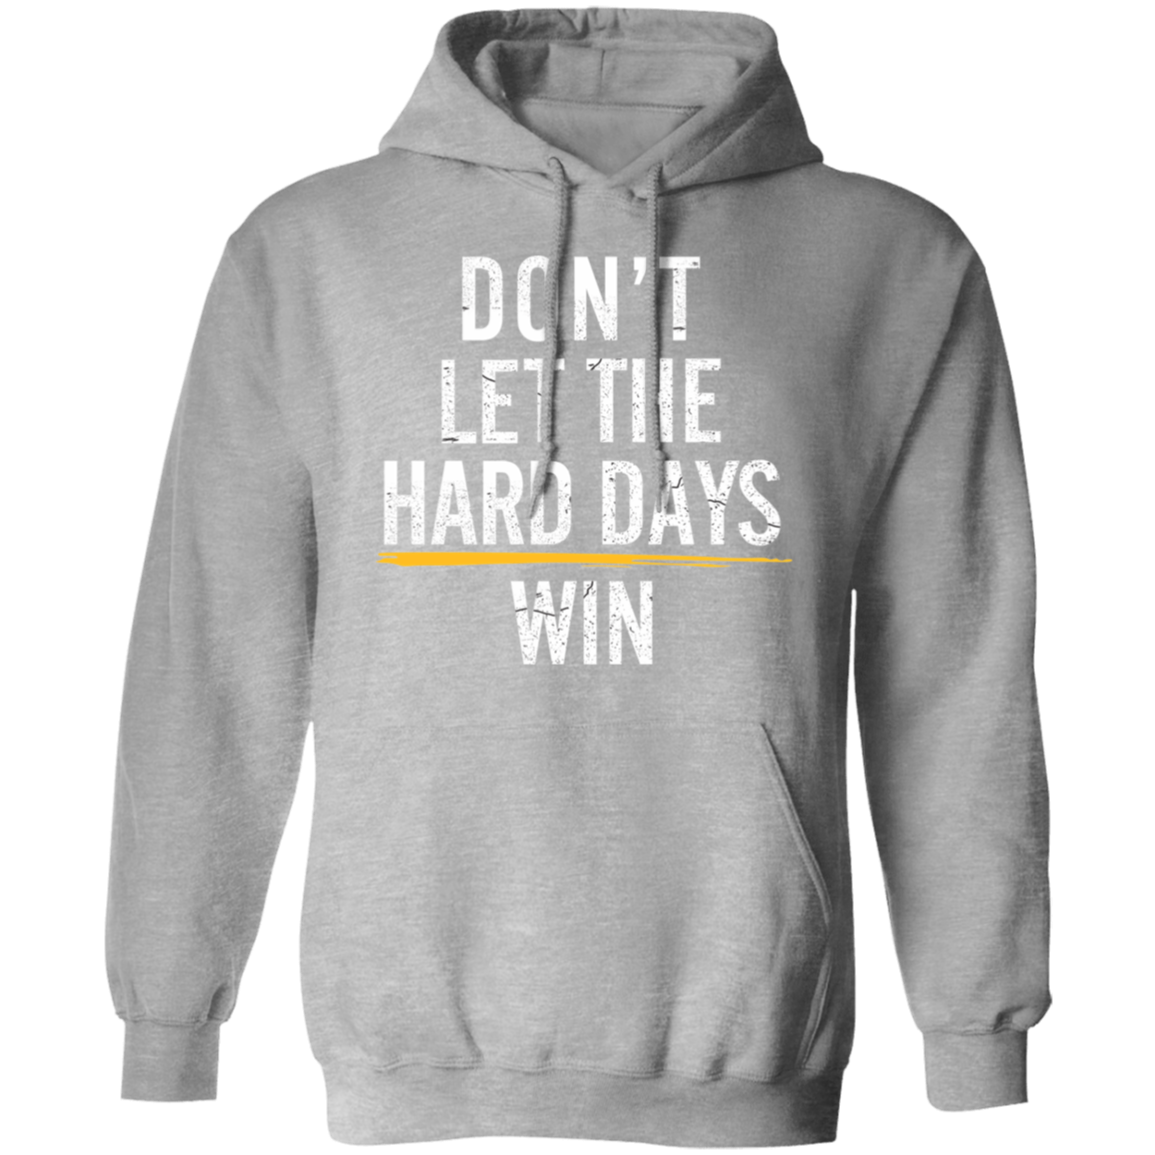 Don't Let the hard days win Premium Unisex Hoodies - Game Day Getup